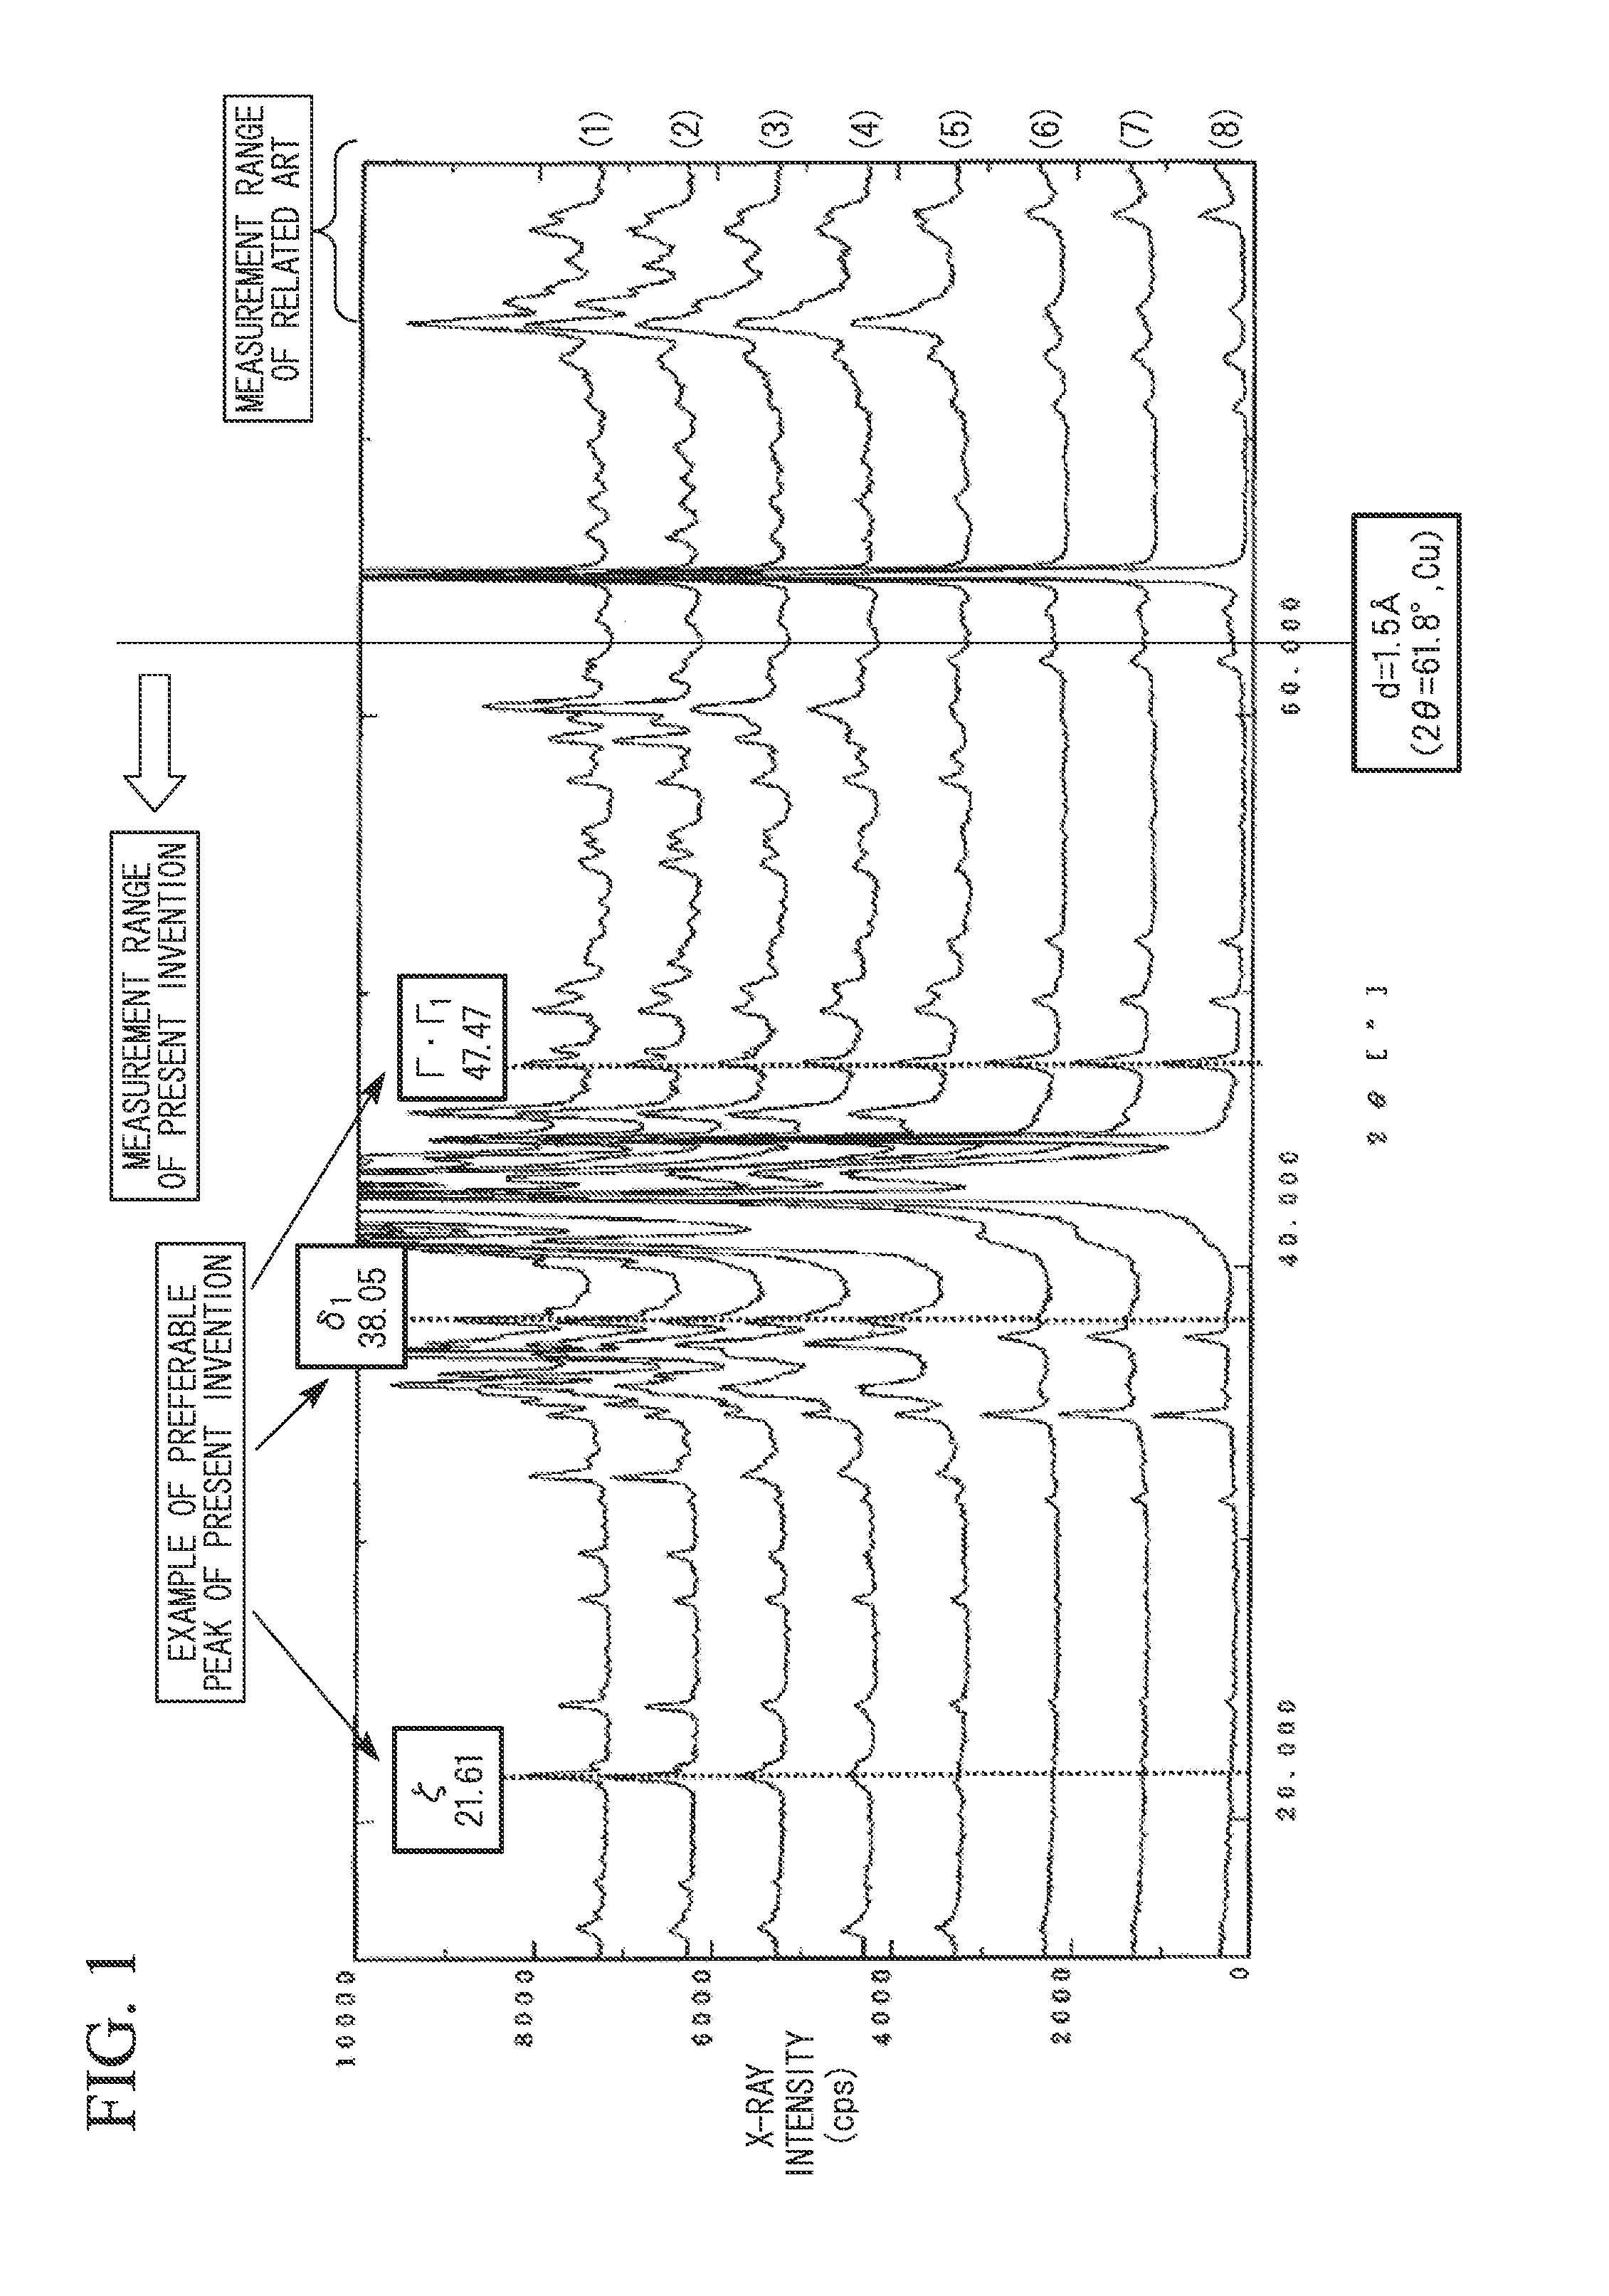 METHOD OF MEASURING THICKNESS OF Fe-Zn ALLOY PHASE OF GALVANNEALED STEEL SHEET AND APPARATUS FOR MEASURING THE SAME